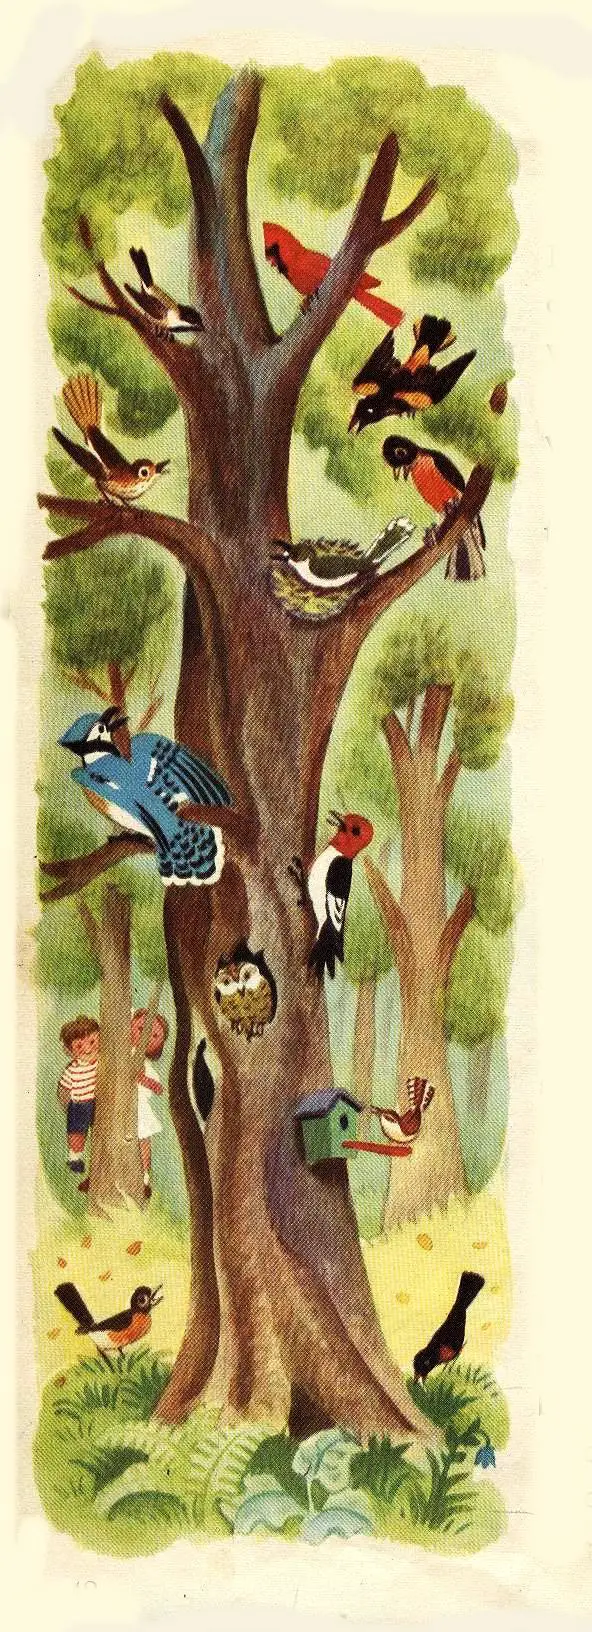 Jane Werner (1914-2005) and Cornelius De Witt (1925-1970) collaborated and produced this 1949 book called- Words How They Look and What They Tell birds in tree